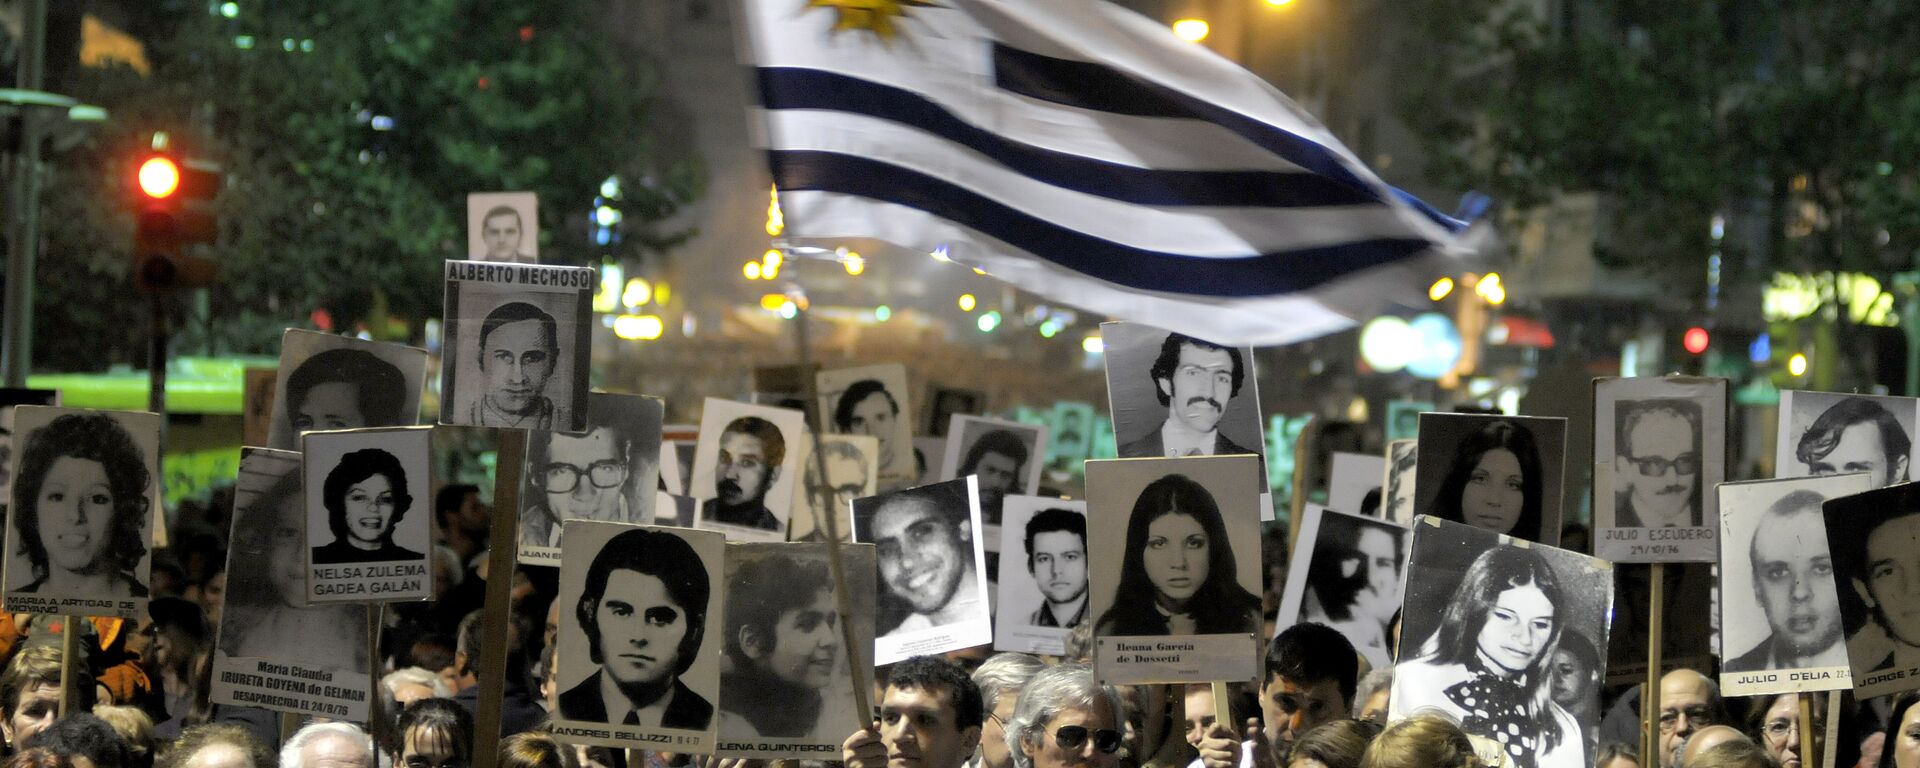 Demonstrators, one waving an Uruguayan flag, carry signs with images of people missing during Uruguay's 1973-85 dictatorship during a march in Montevideo, Uruguay - Sputnik Mundo, 1920, 16.01.2023